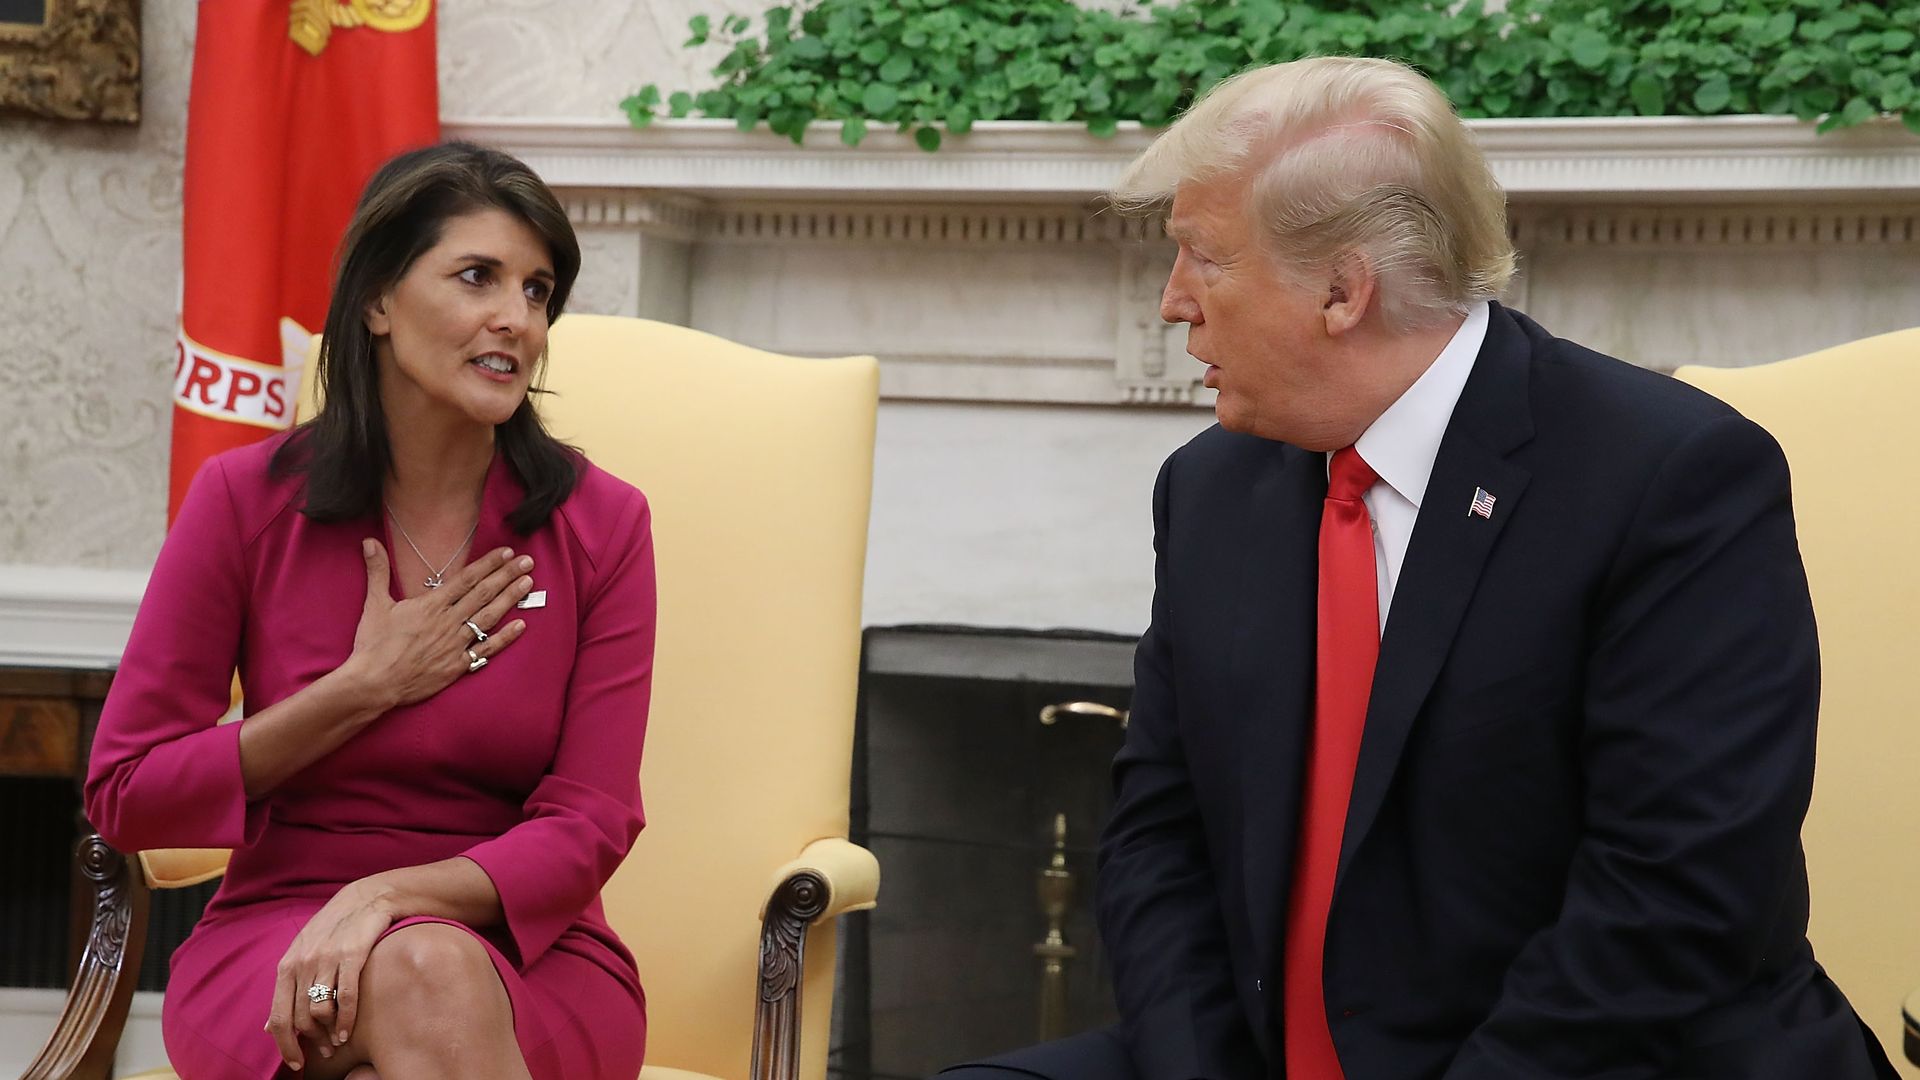 President Donald Trump announces that he has accepted the resignation of Nikki Haley as US Ambassador to the United Nations, in the Oval Office on October 9, 2018 in Washington, DC.